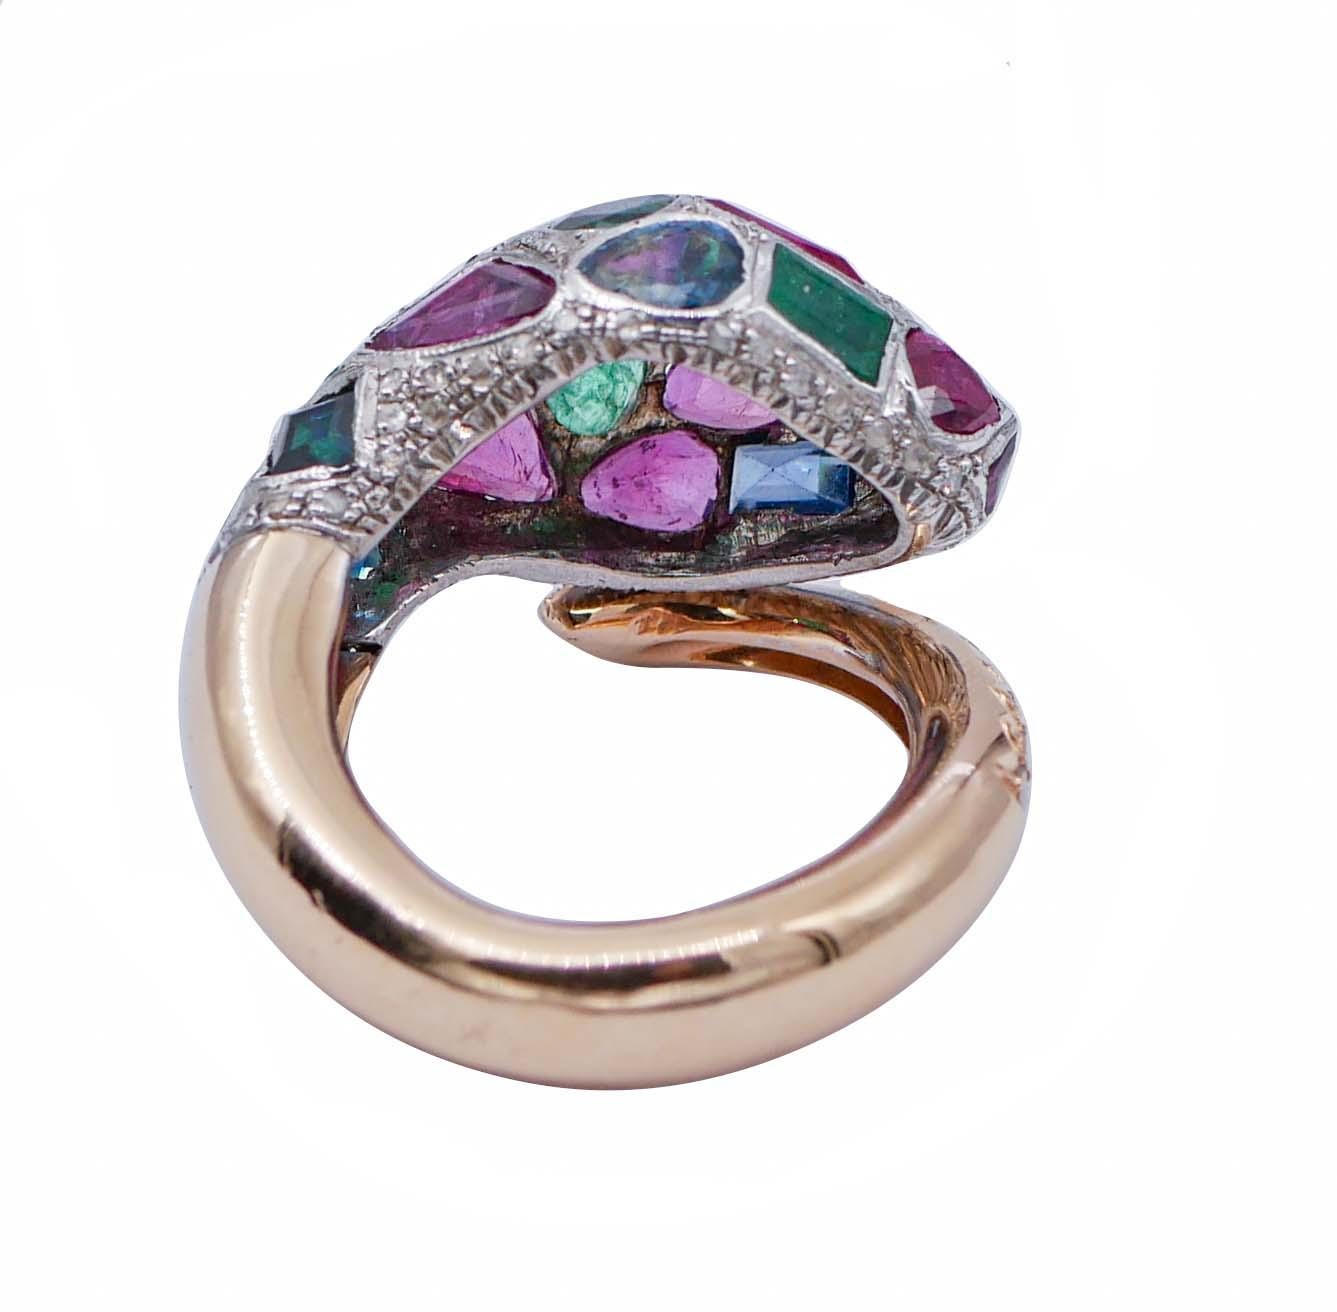 Retro Emeralds, Rubies, Sapphires, Diamonds, 14 Kt Rose Gold and Silver Snake Ring